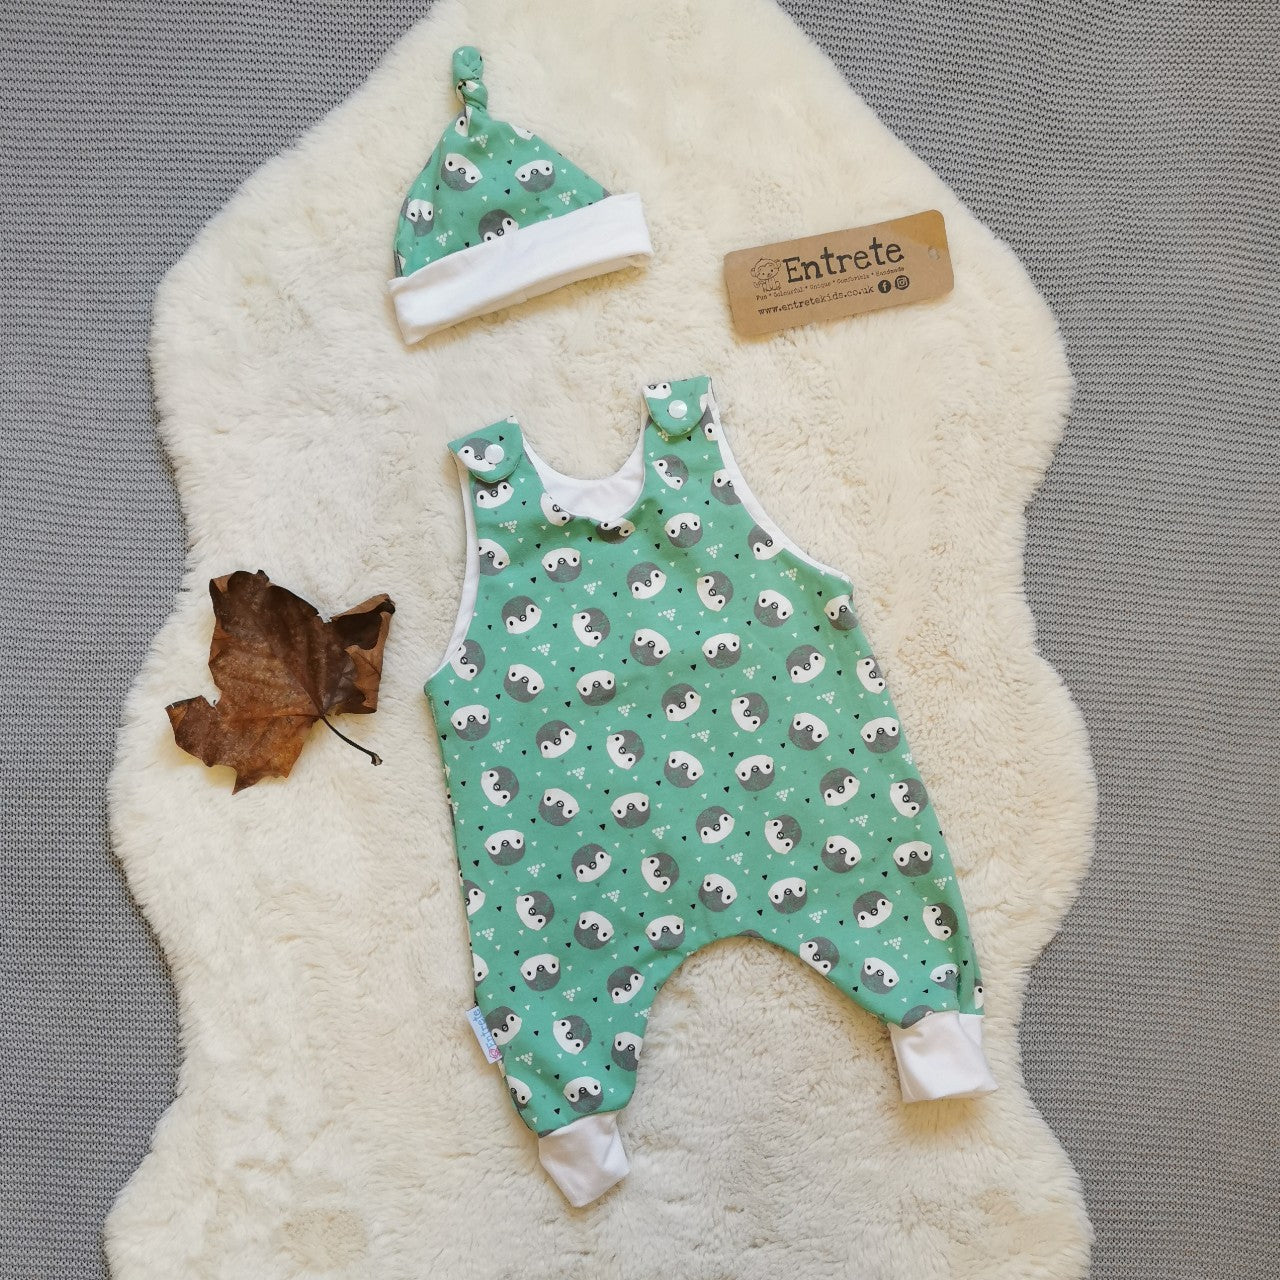 Romper gift set, shown in mint penguins cotton jersey for demonstration purposes only. Yours will be handmade using red rainbow striped cotton jersey.